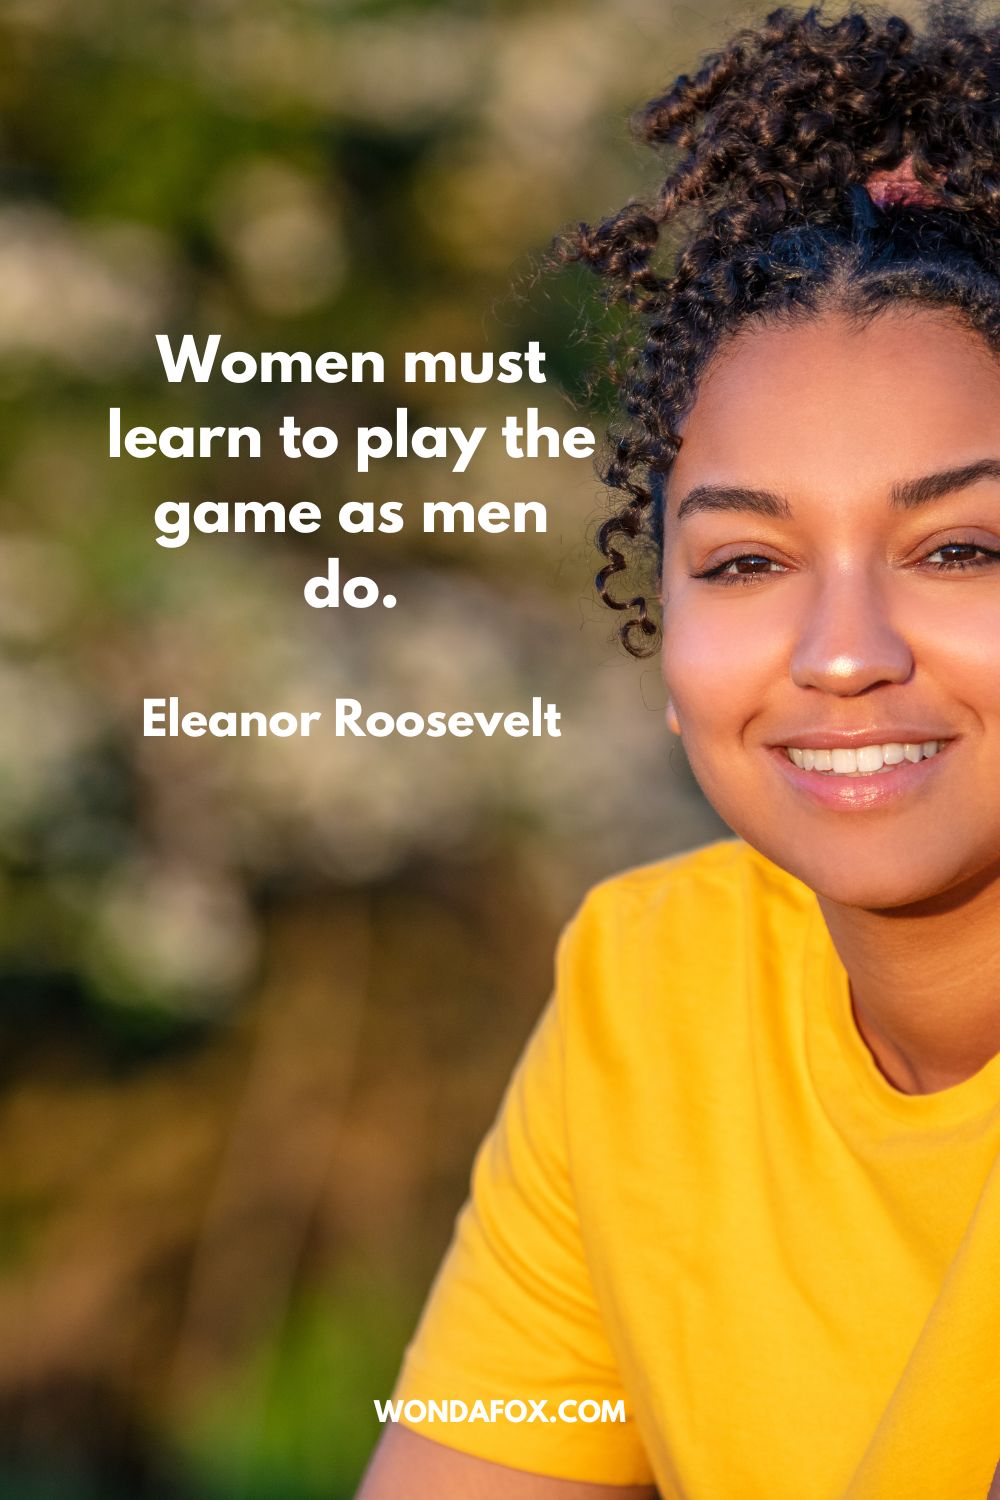 Women must learn to play the game as men do. Eleanor Roosevelt